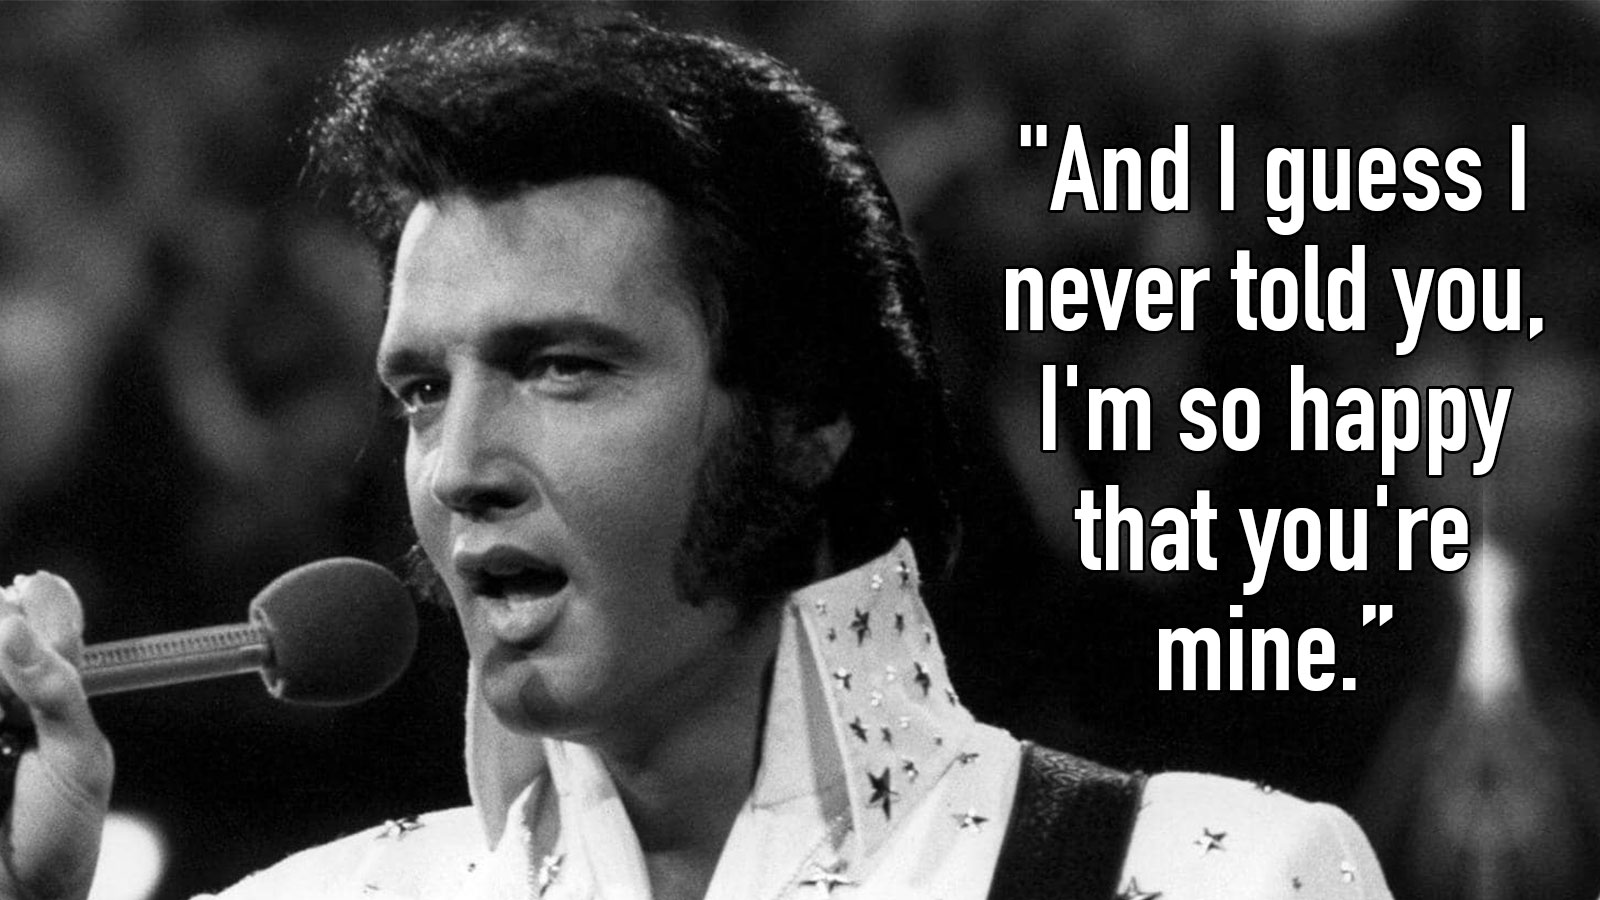 Can You Guess Which Elvis Presley Song This Lyric Is From? 131